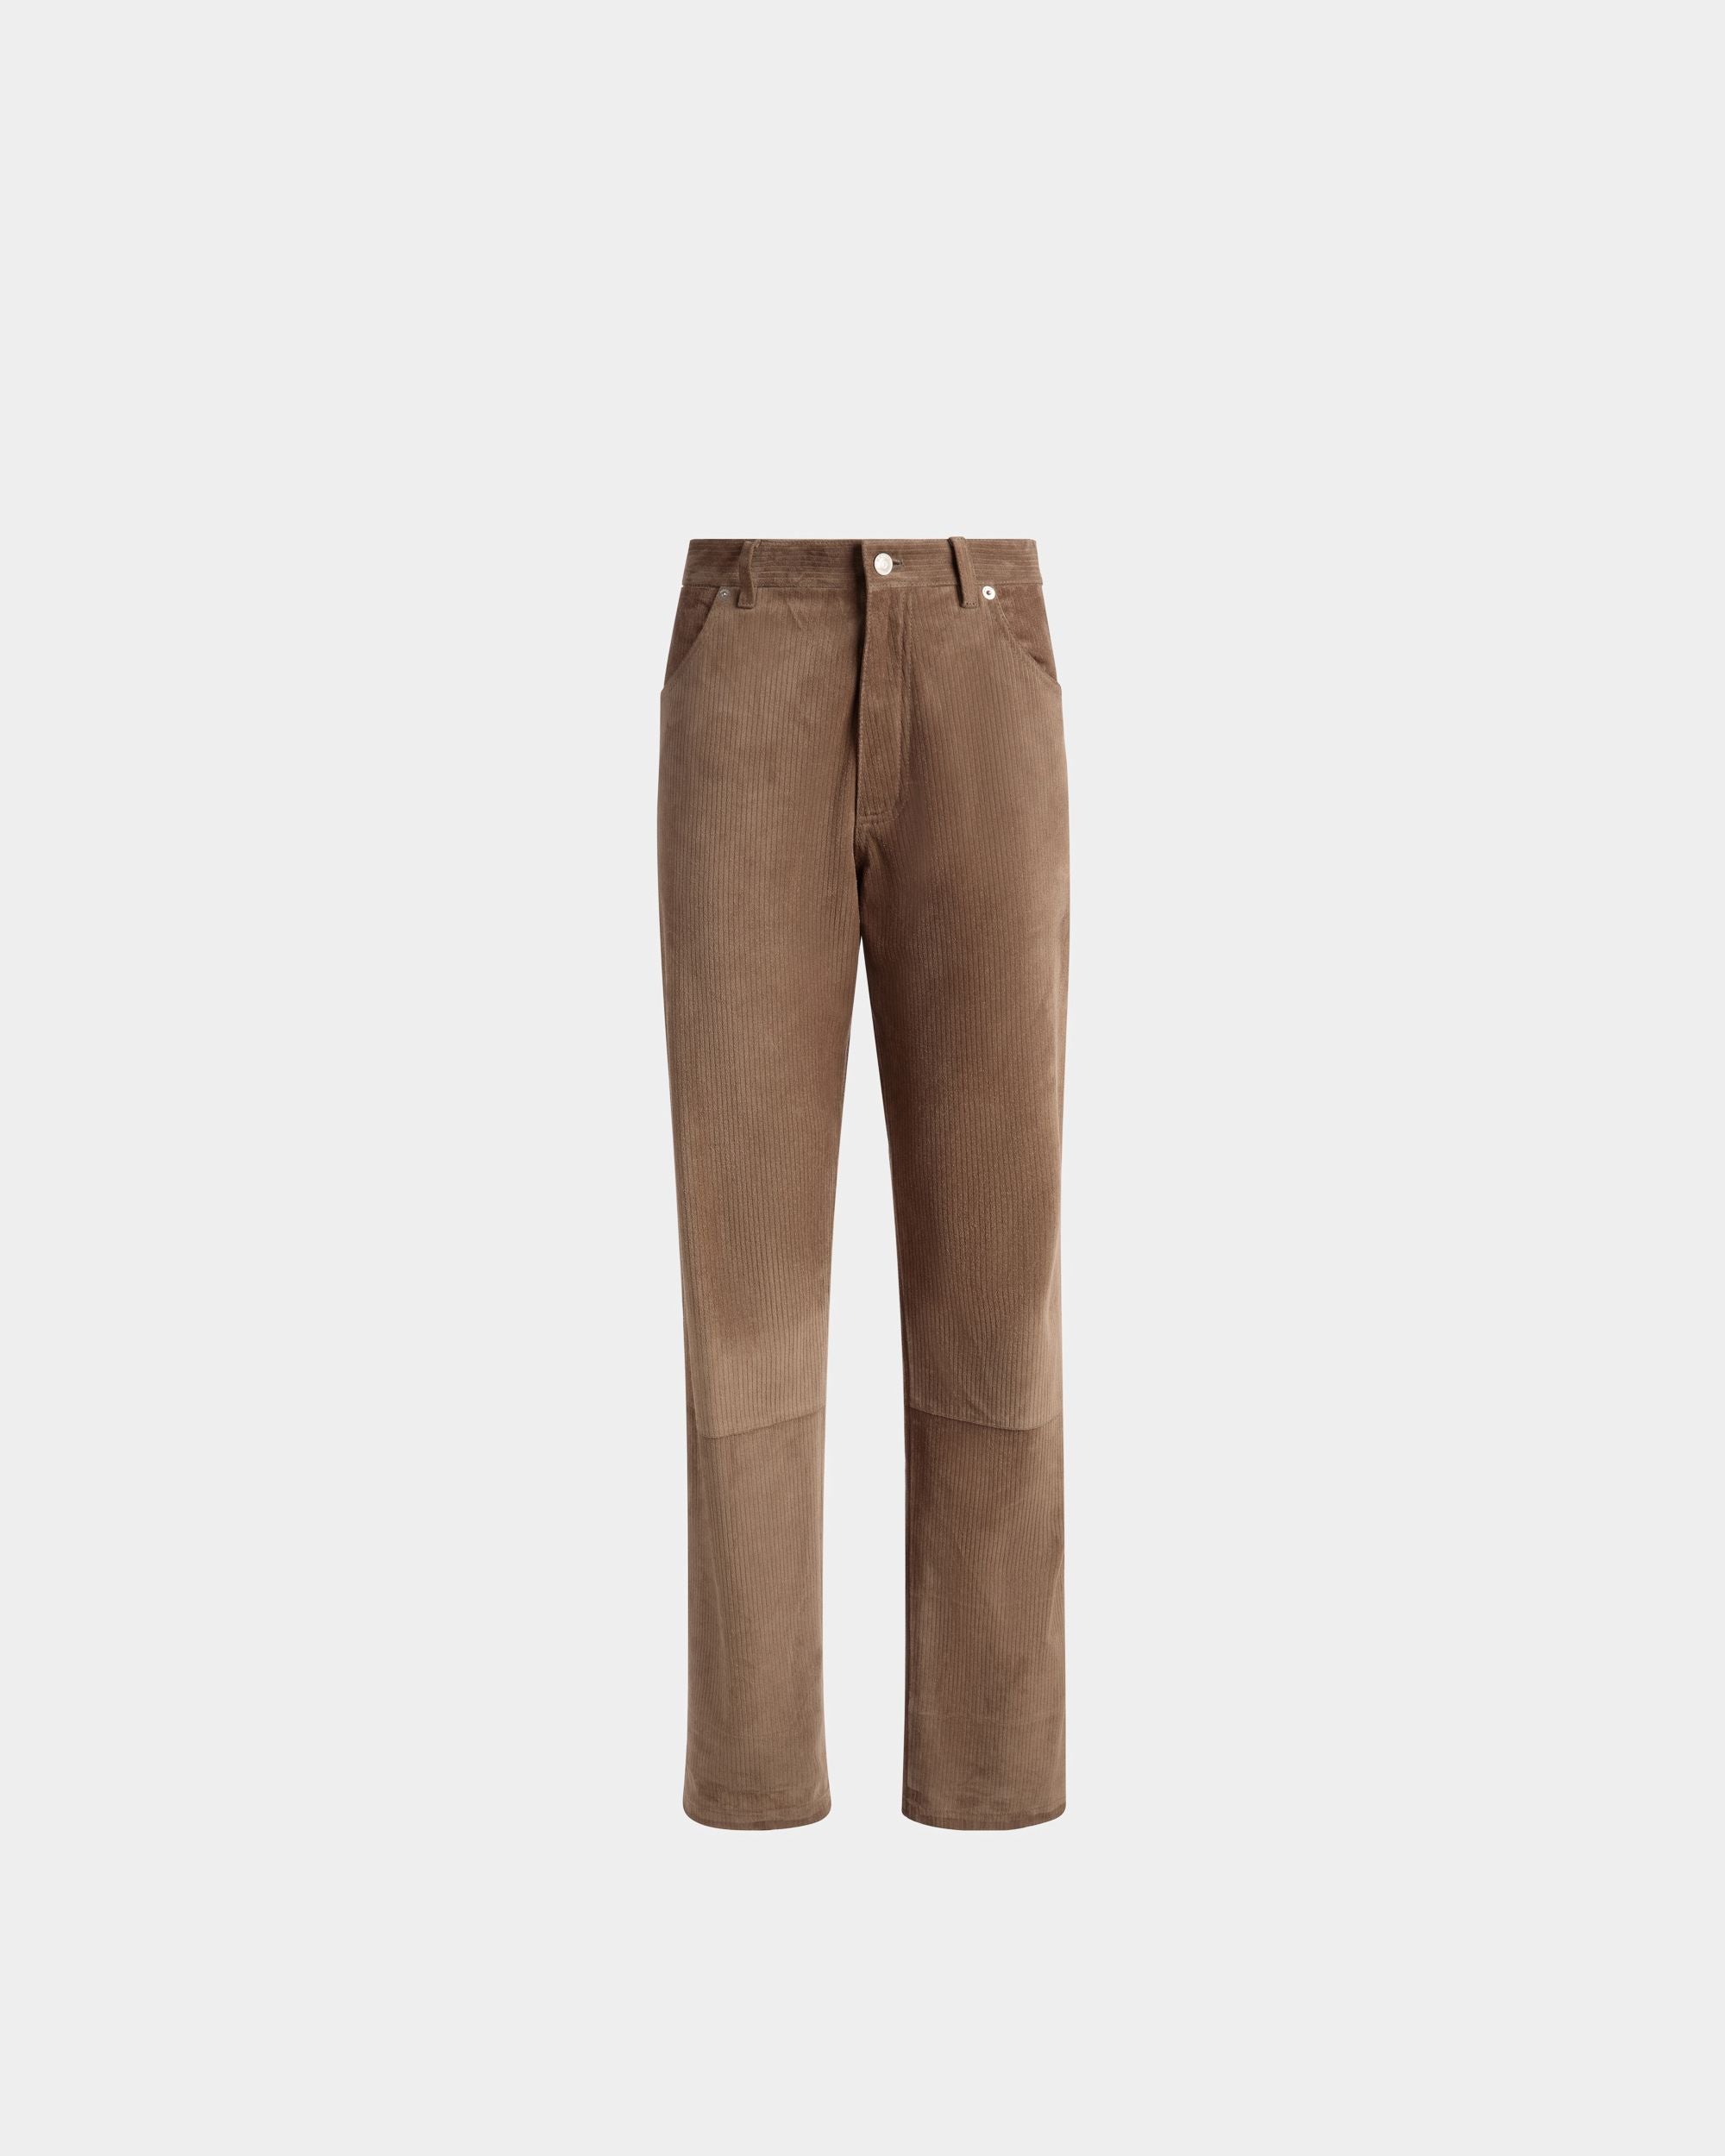 Men's Straight Trousers In Sepia Leather | Bally | Still Life Front